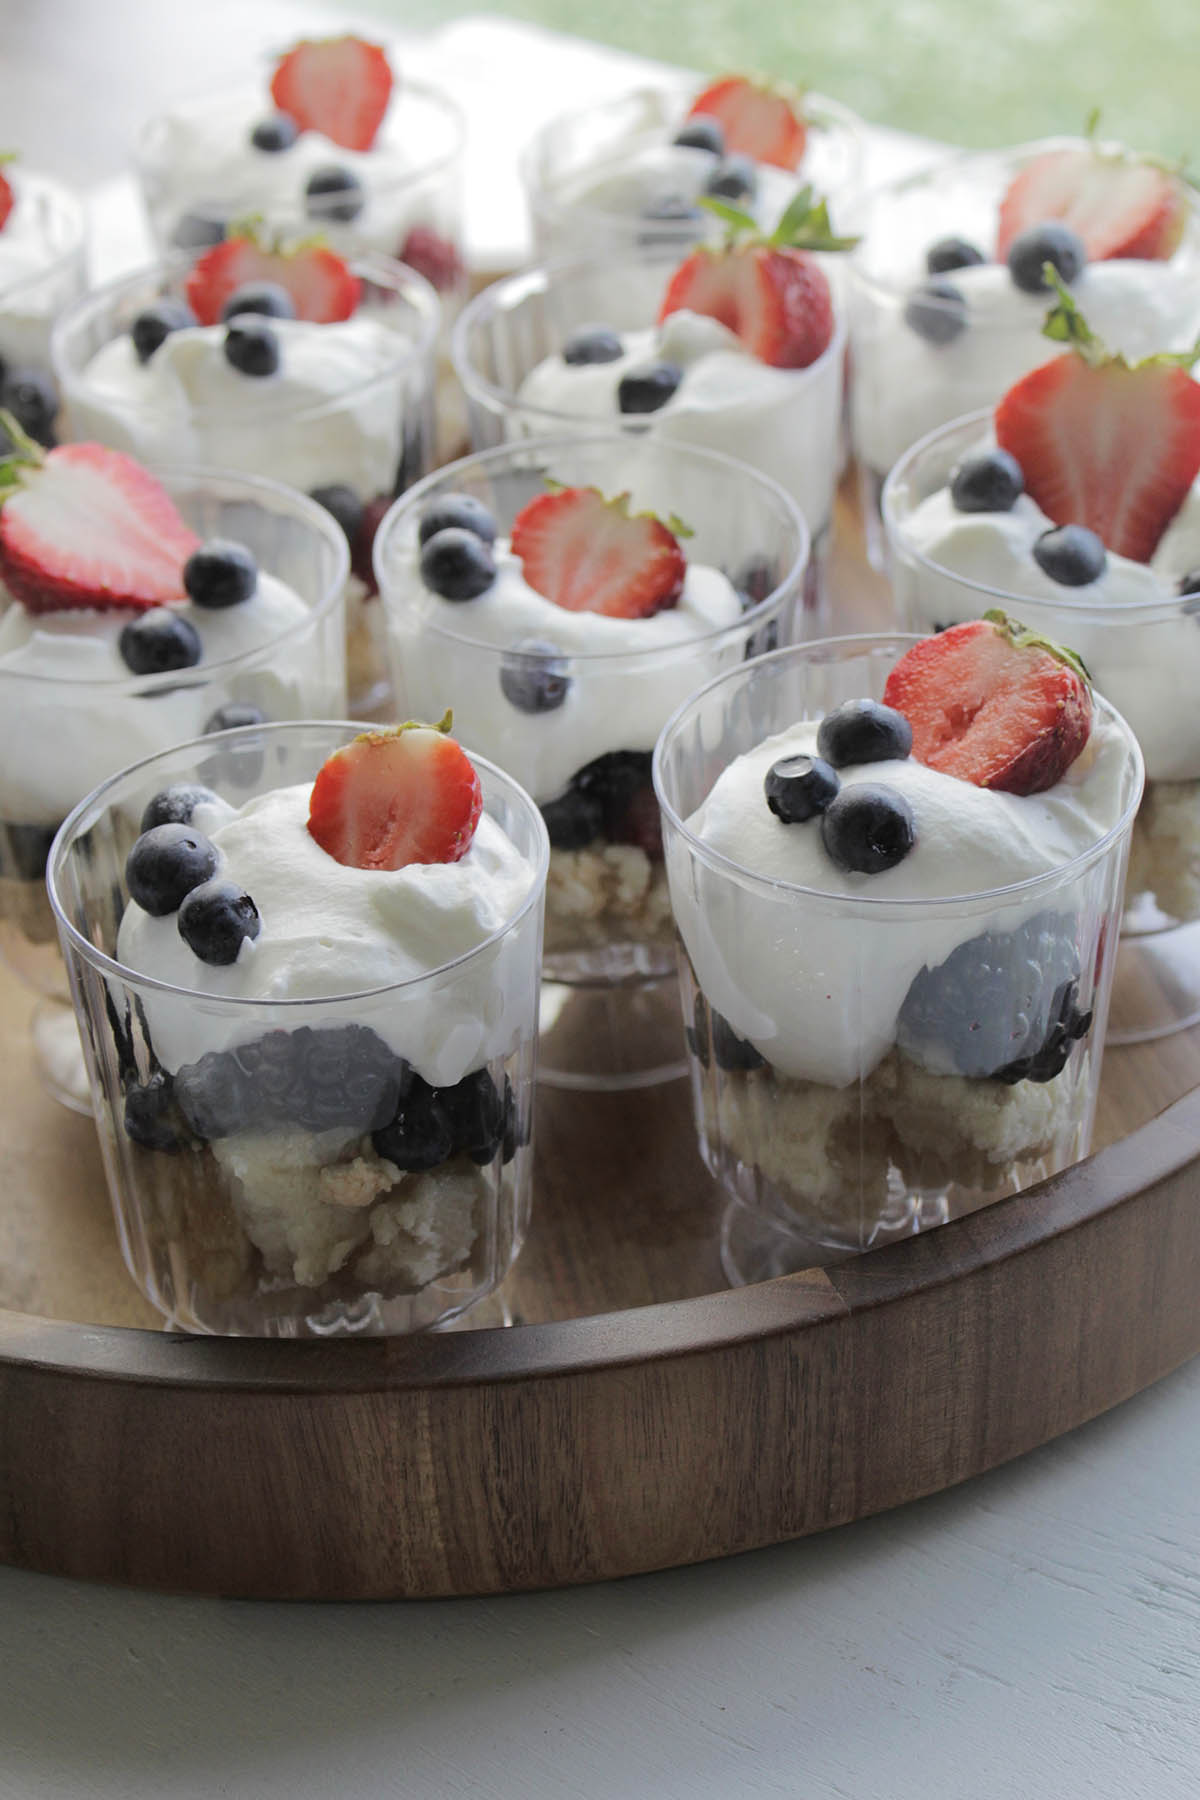 mini trifles with strawberries, blueberries, and whipped cream.